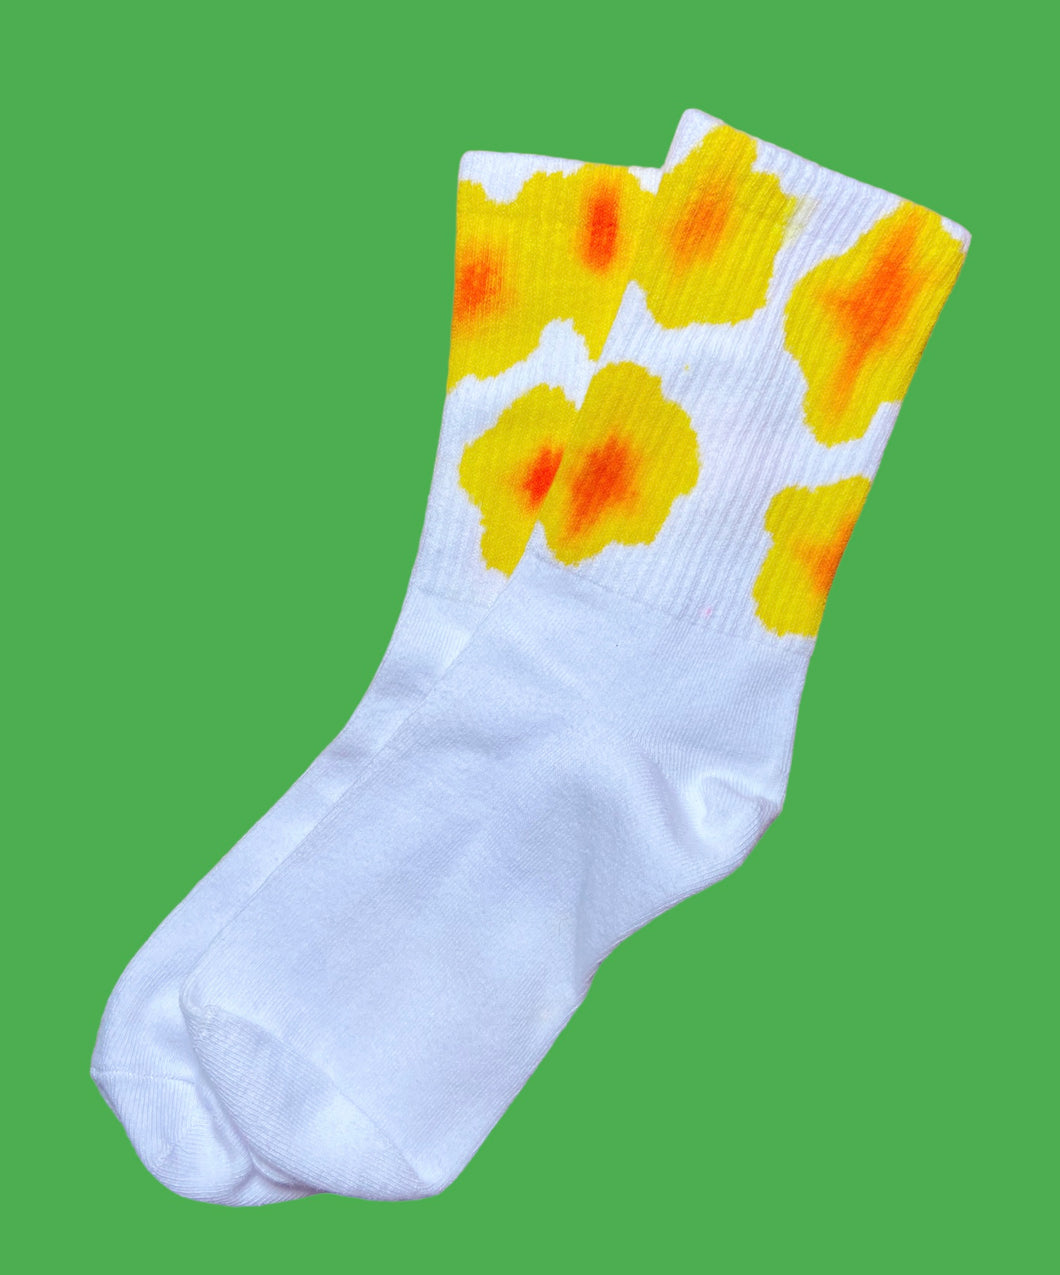 Hand painted yellow floral socks